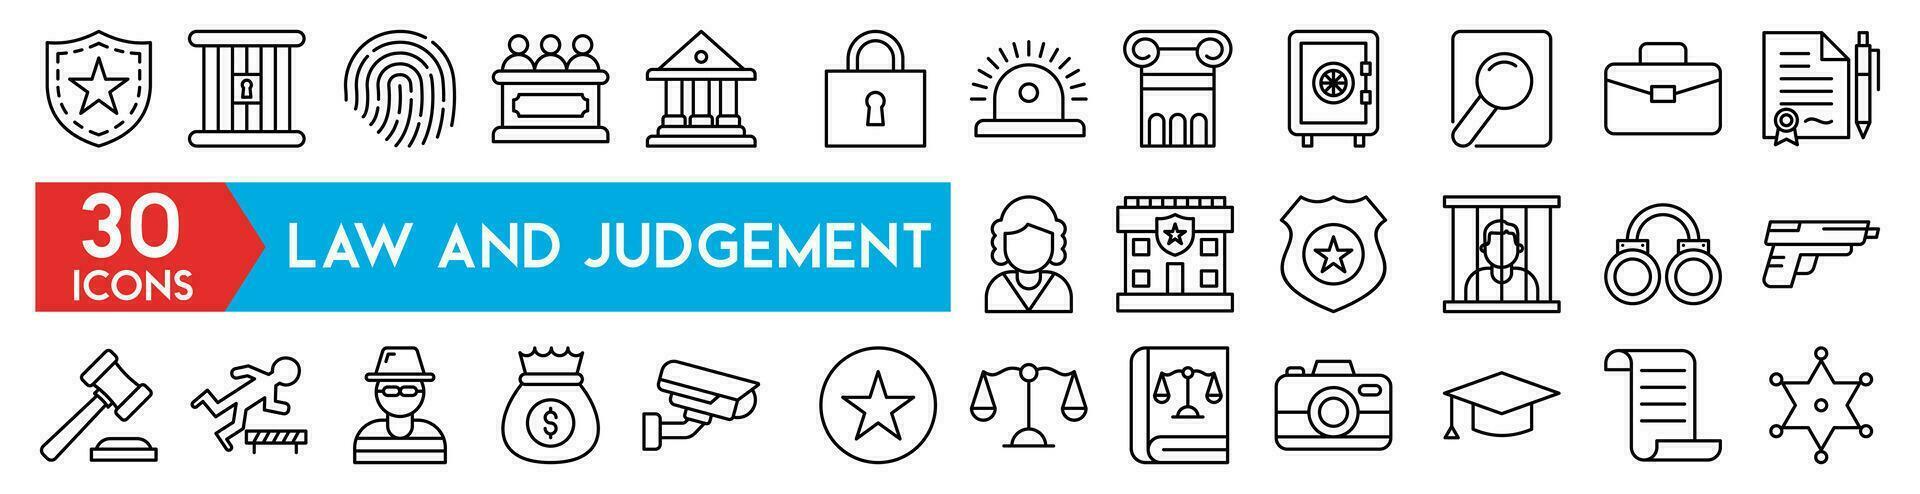 Law and Judgement line icons. Justice, Court of law and Government vector linear icon set.